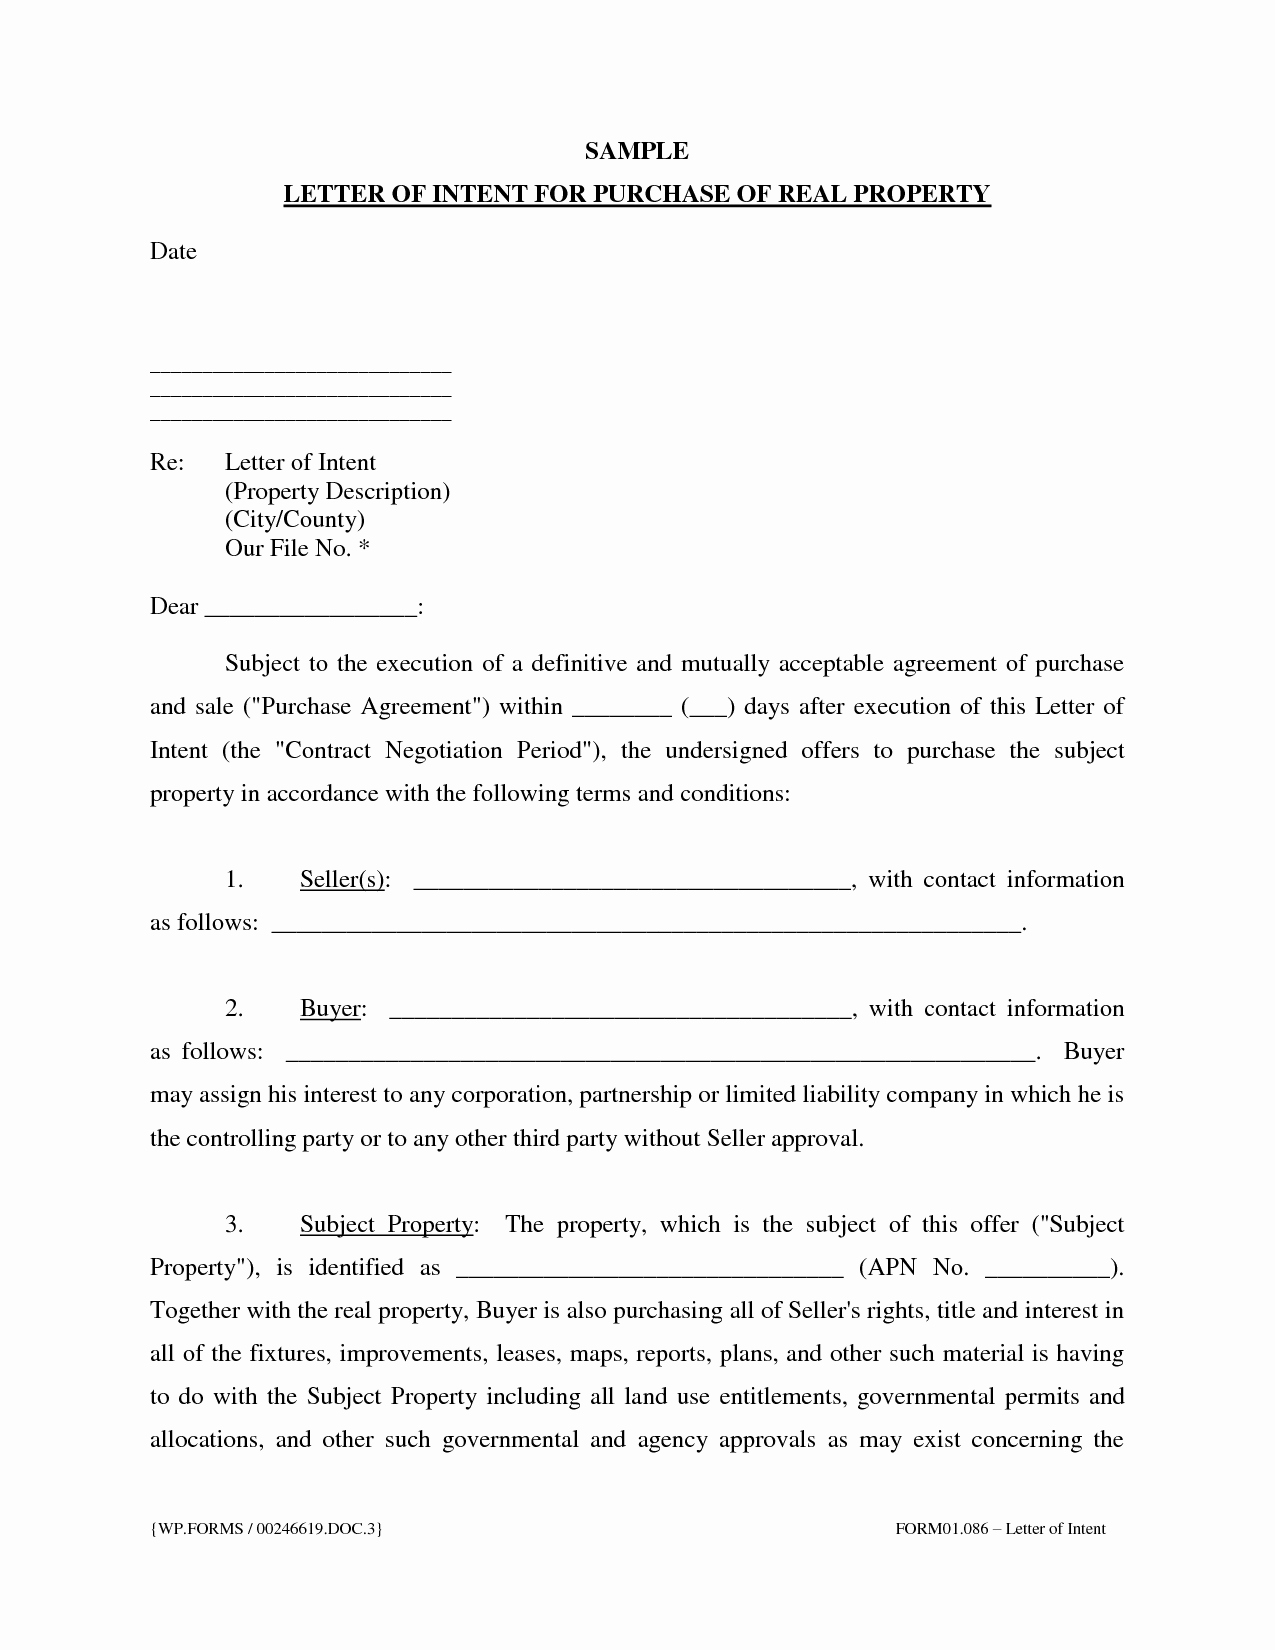 sample letter of intent to purchase real estate